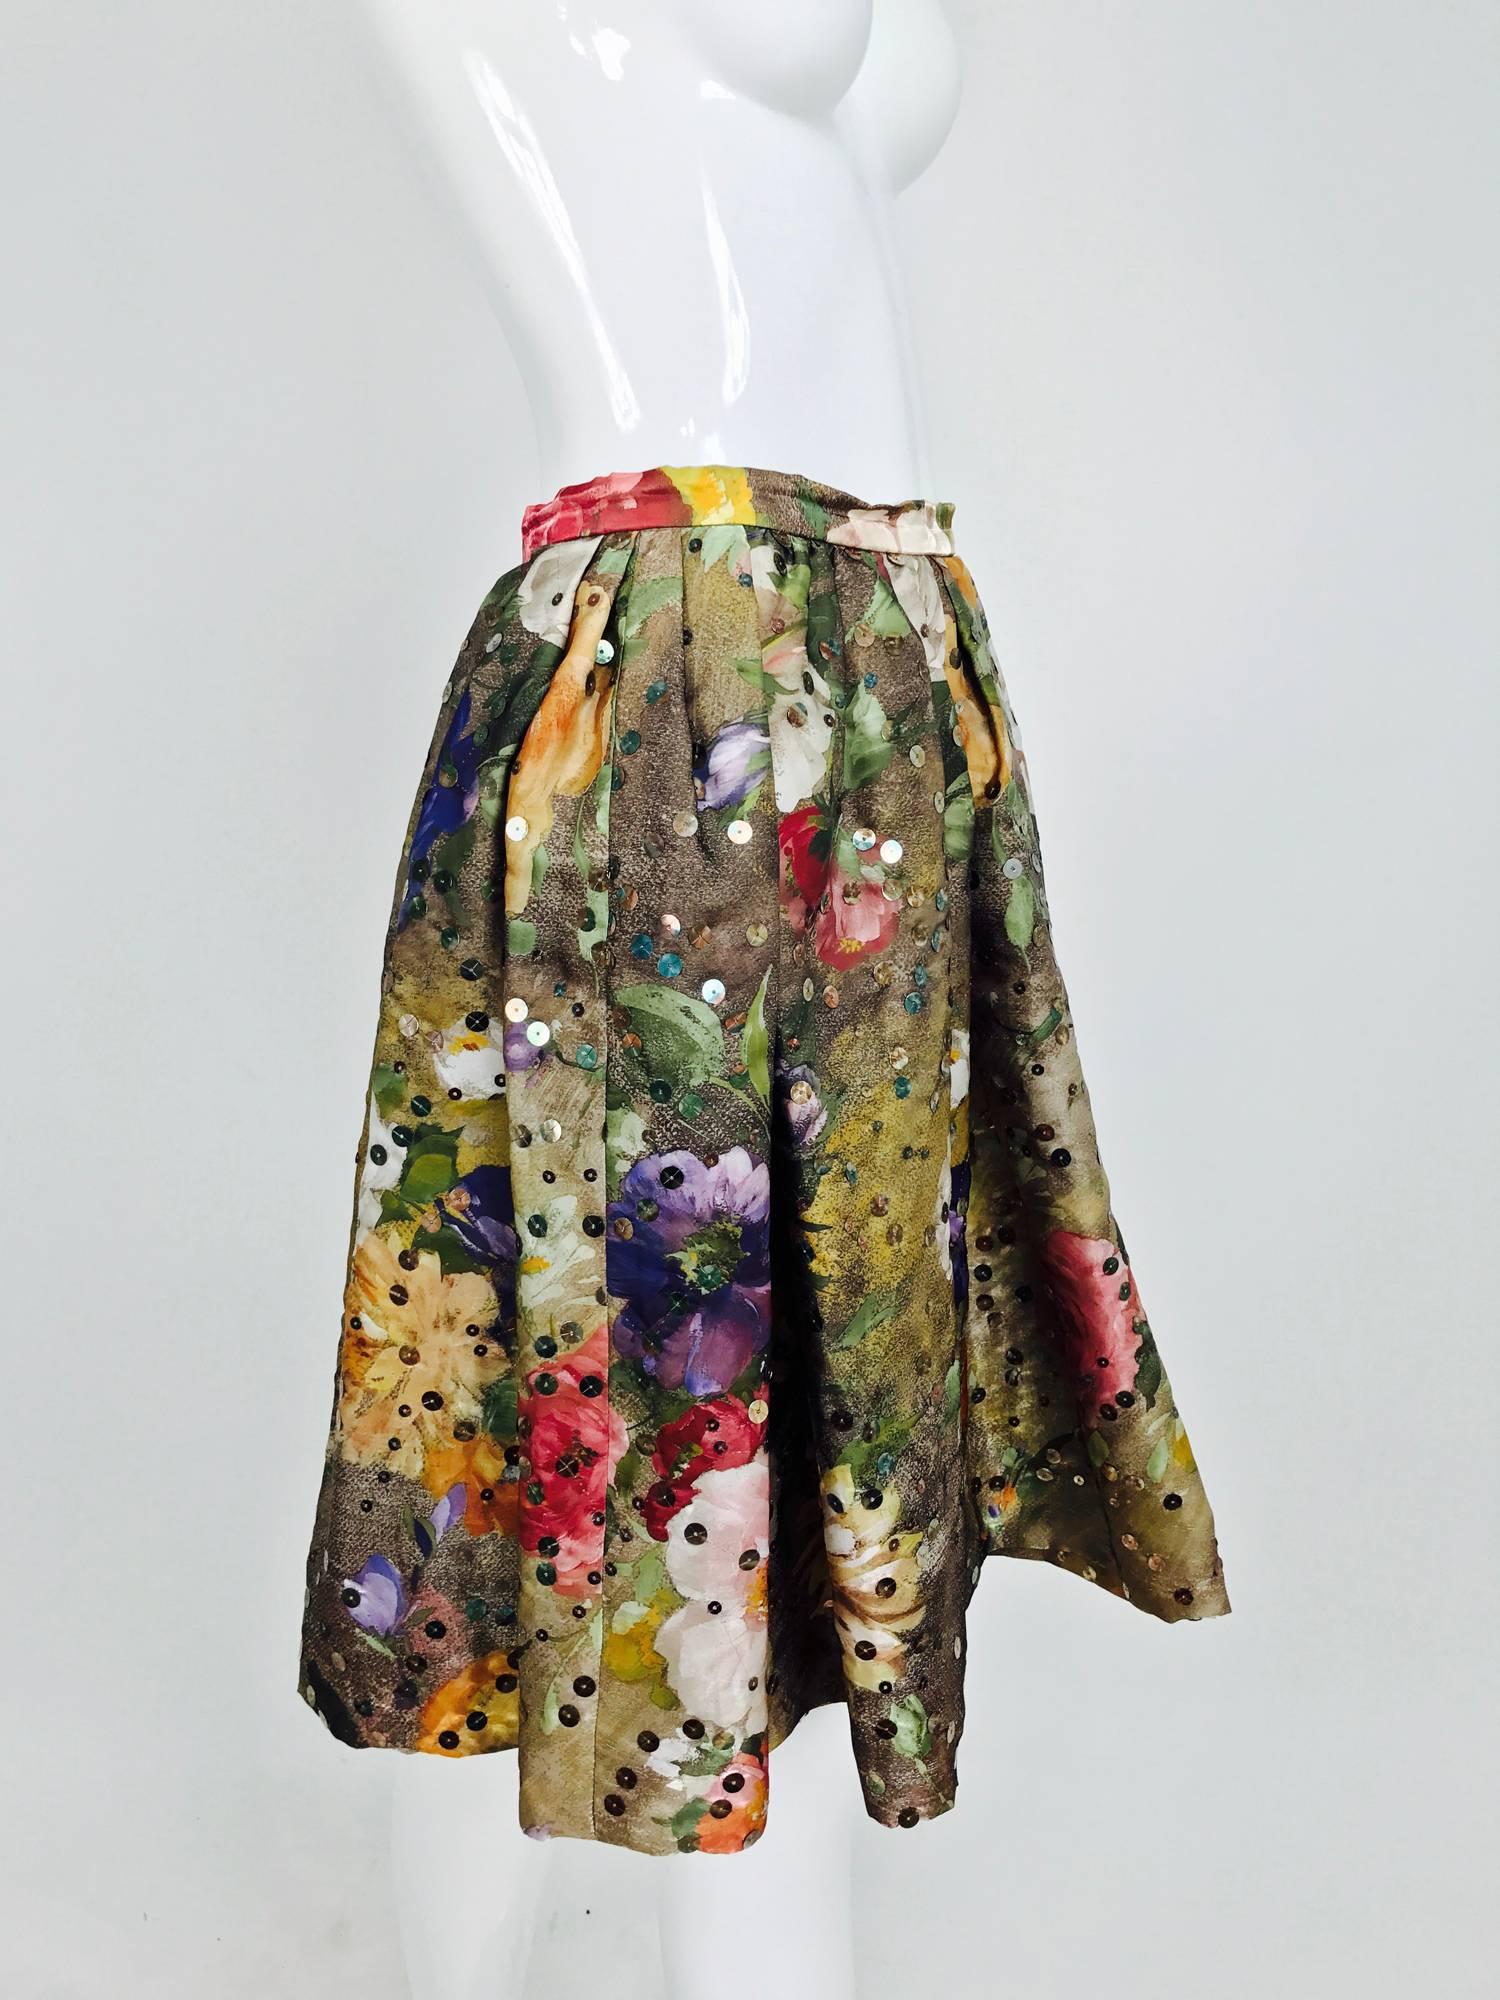 Vintage Christian LaCroix sequined floral satin open pleated skirt 1980s 3